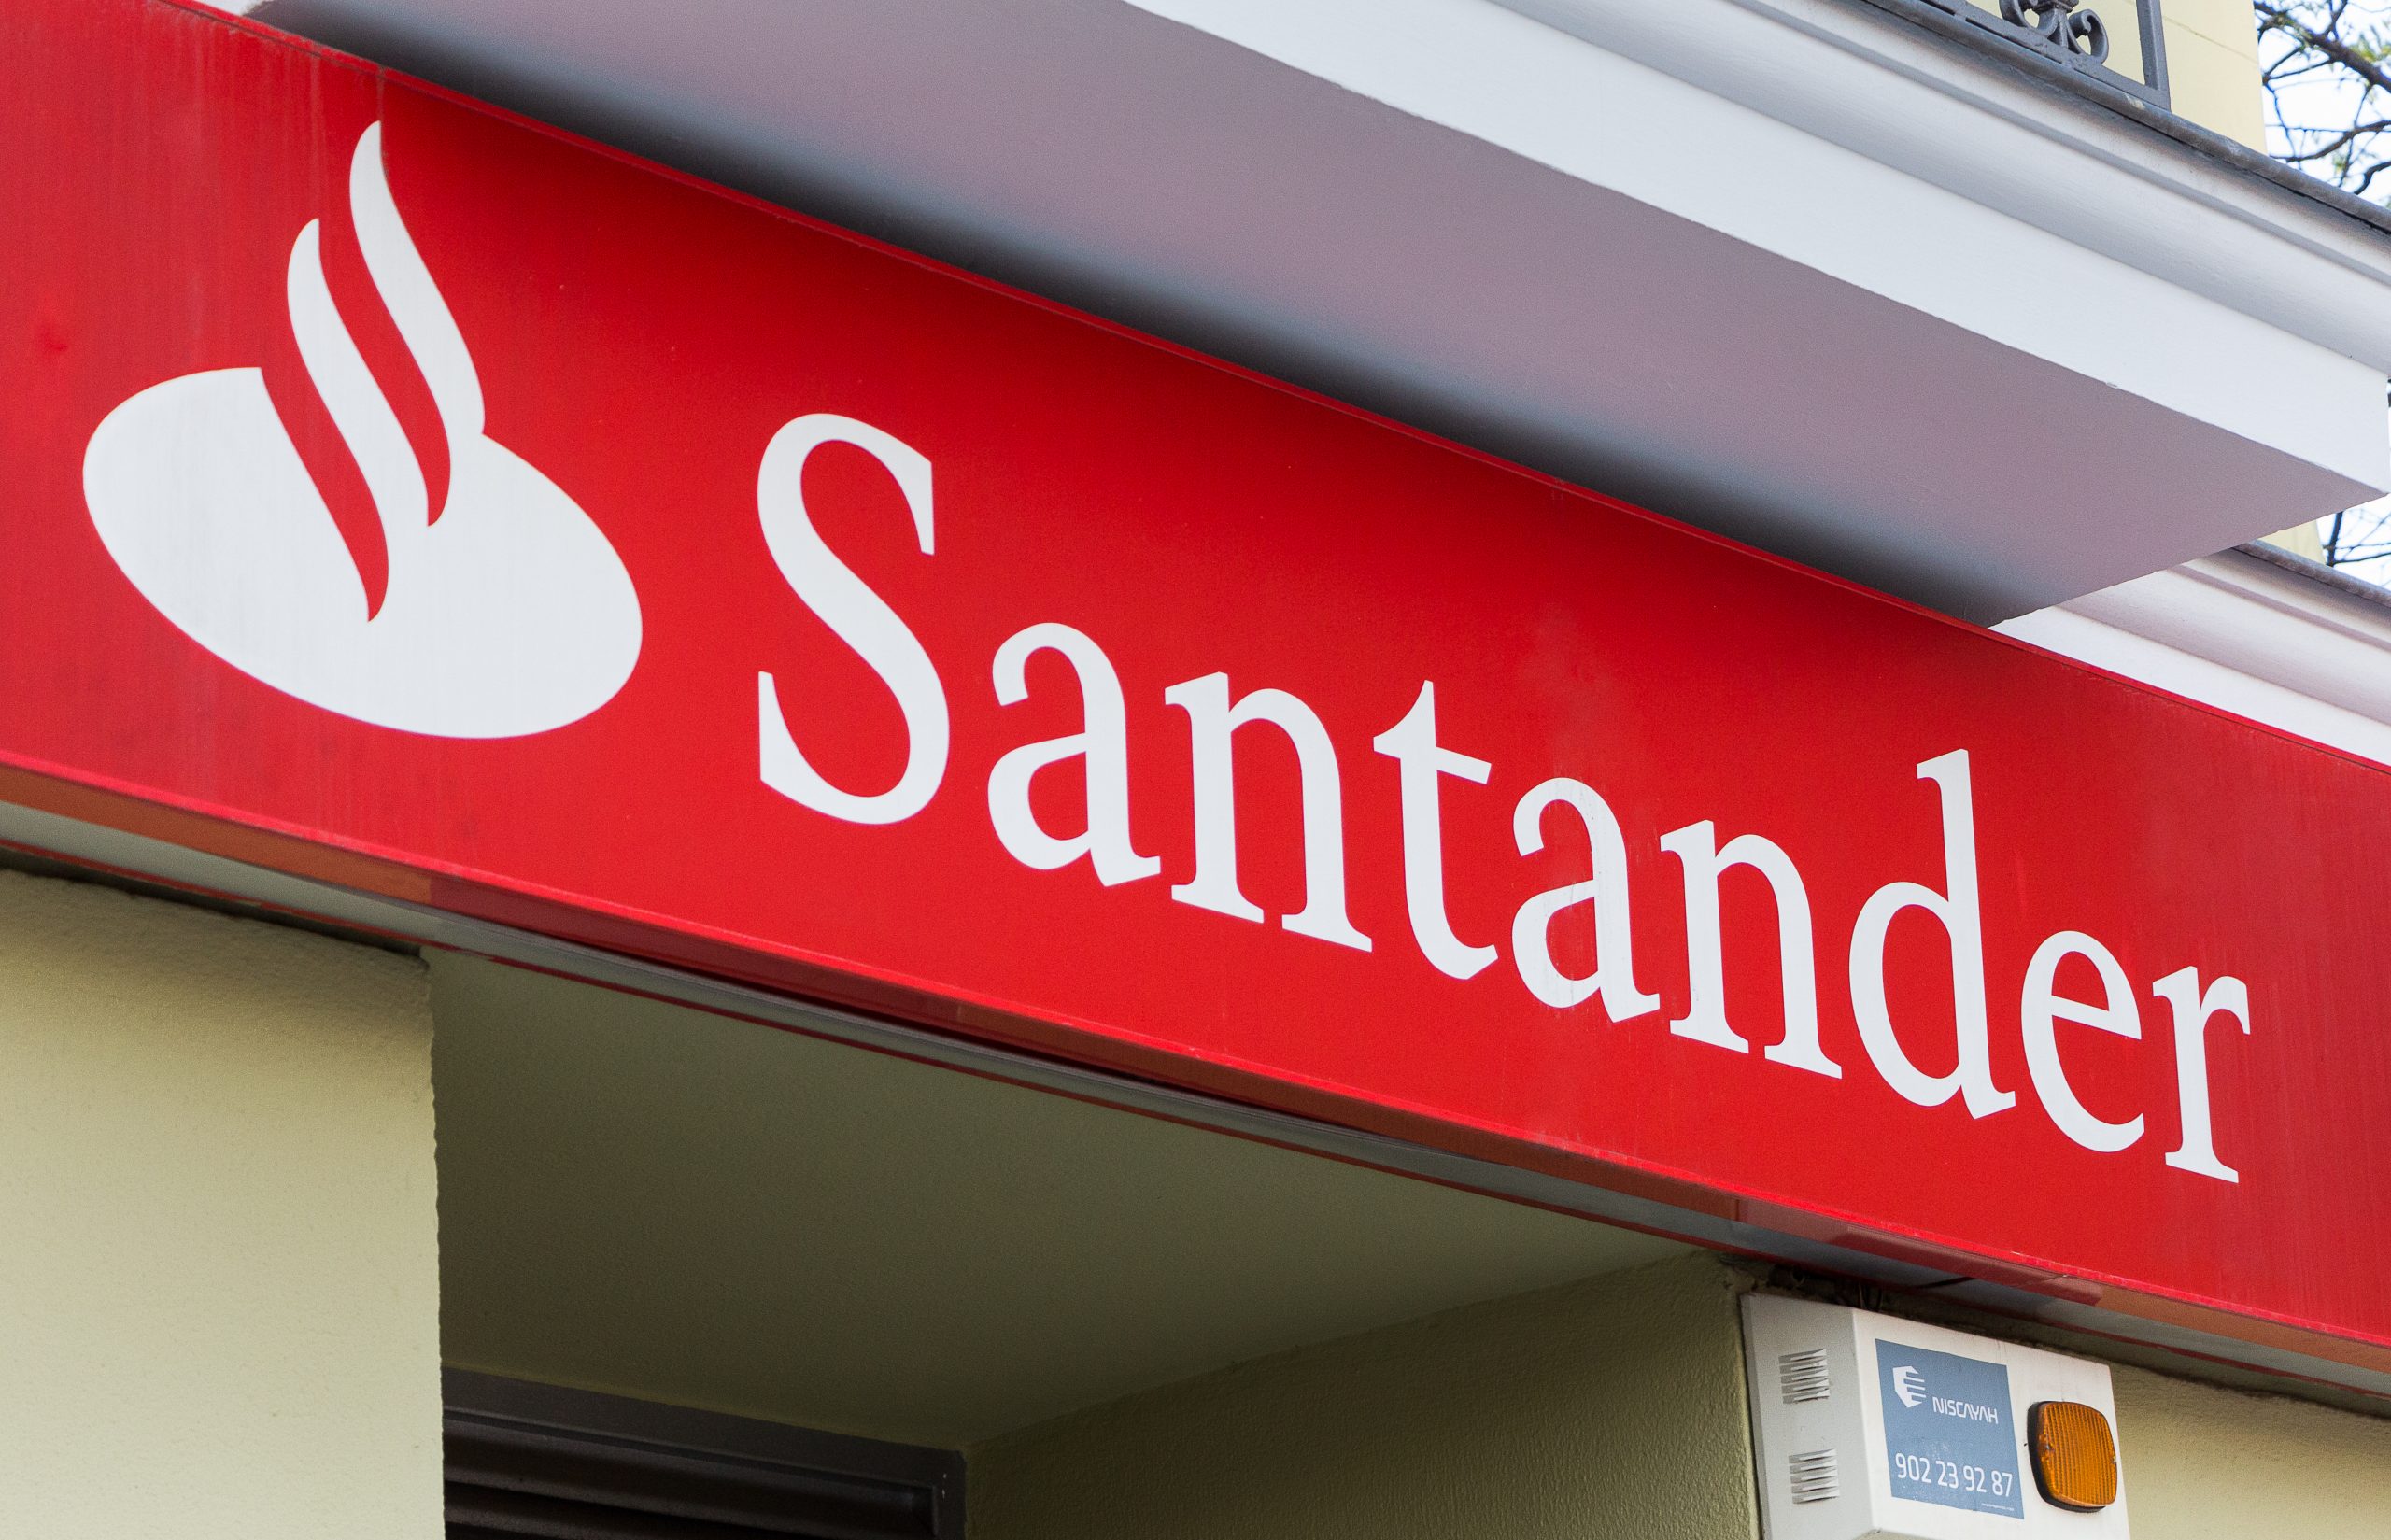 Santander ups max LTV for self-employed applicants to 90 per cent